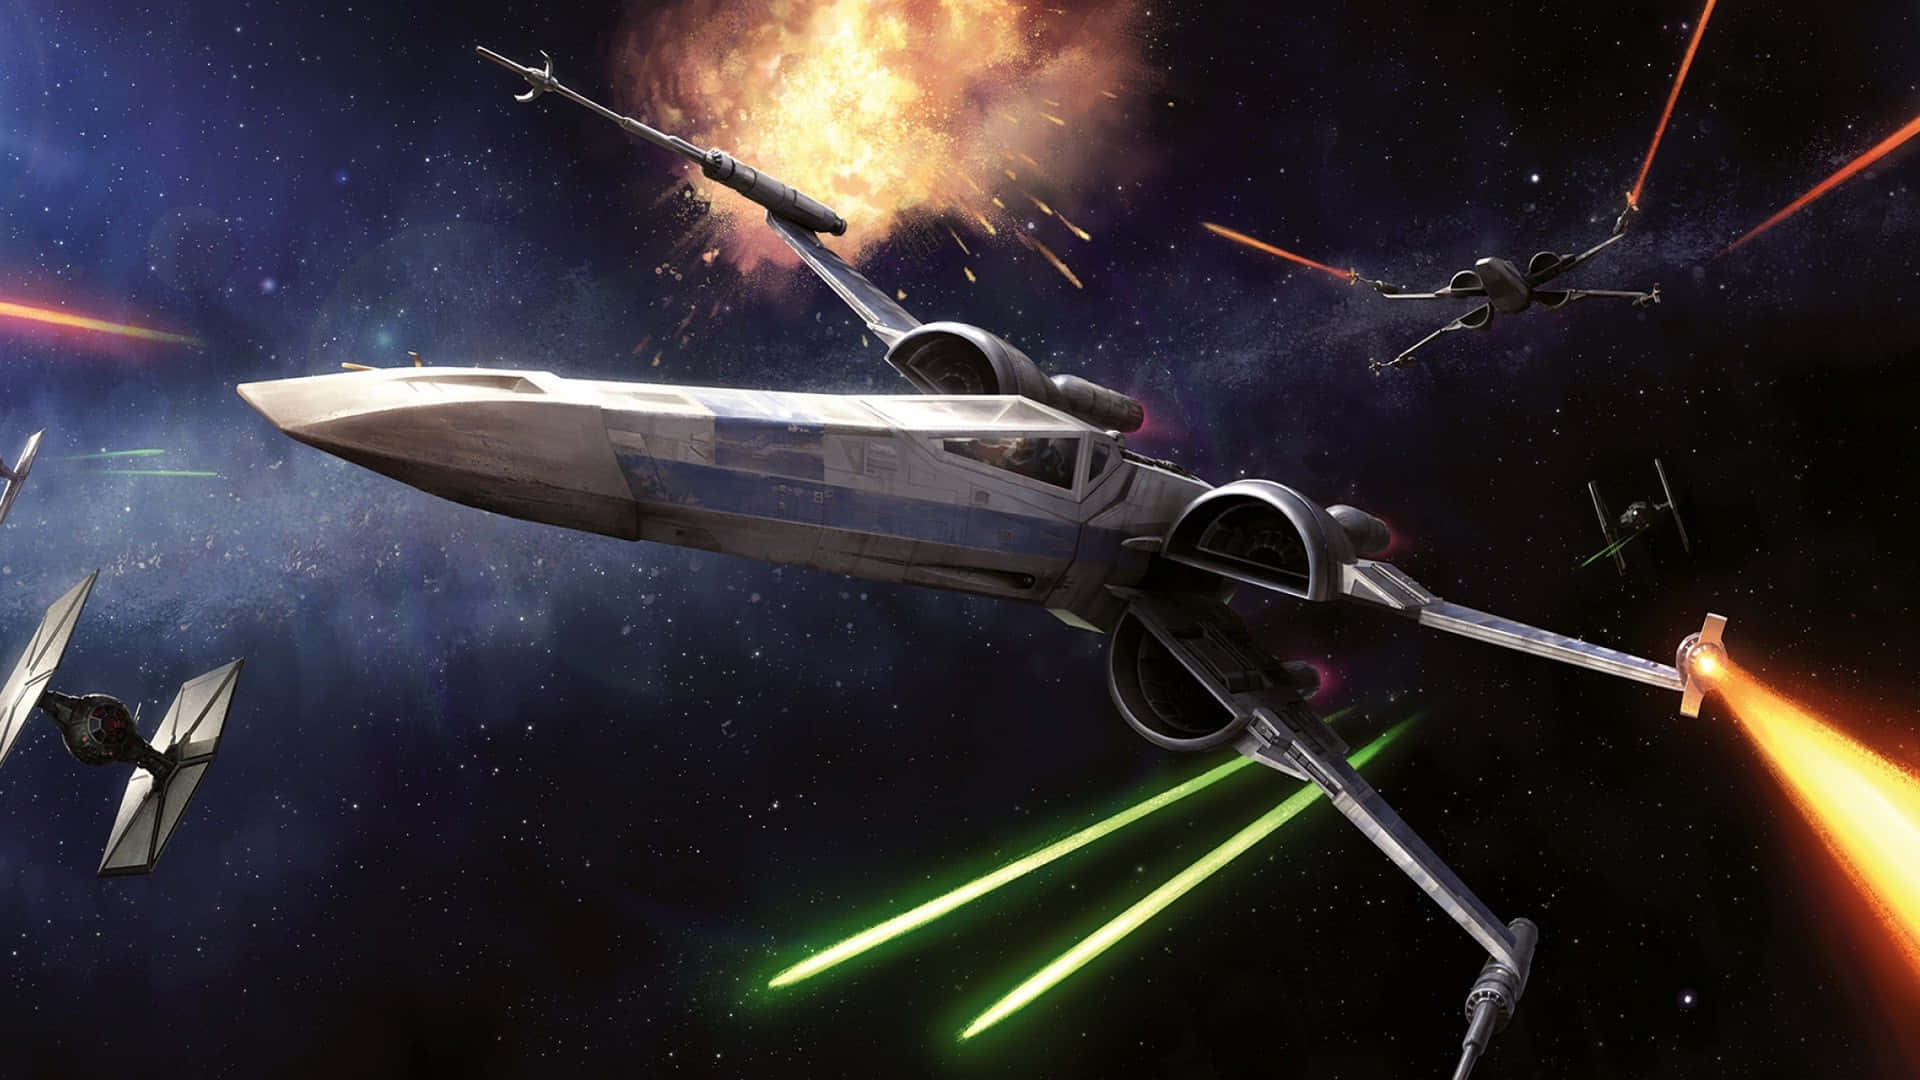 Explore the universe with the Star Wars Space Adventures